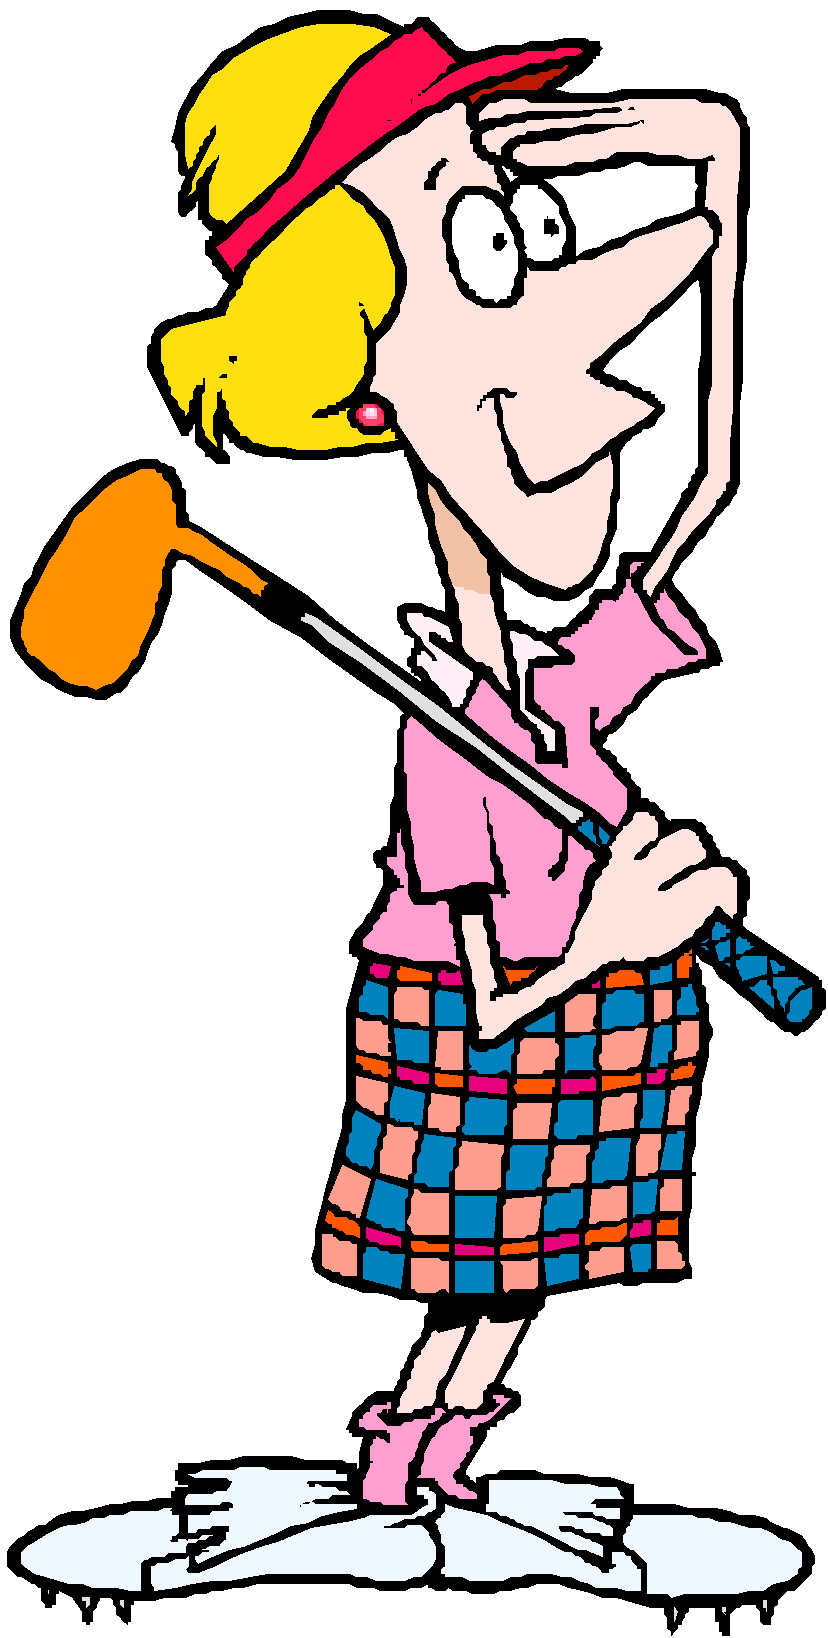 library clipart illustration